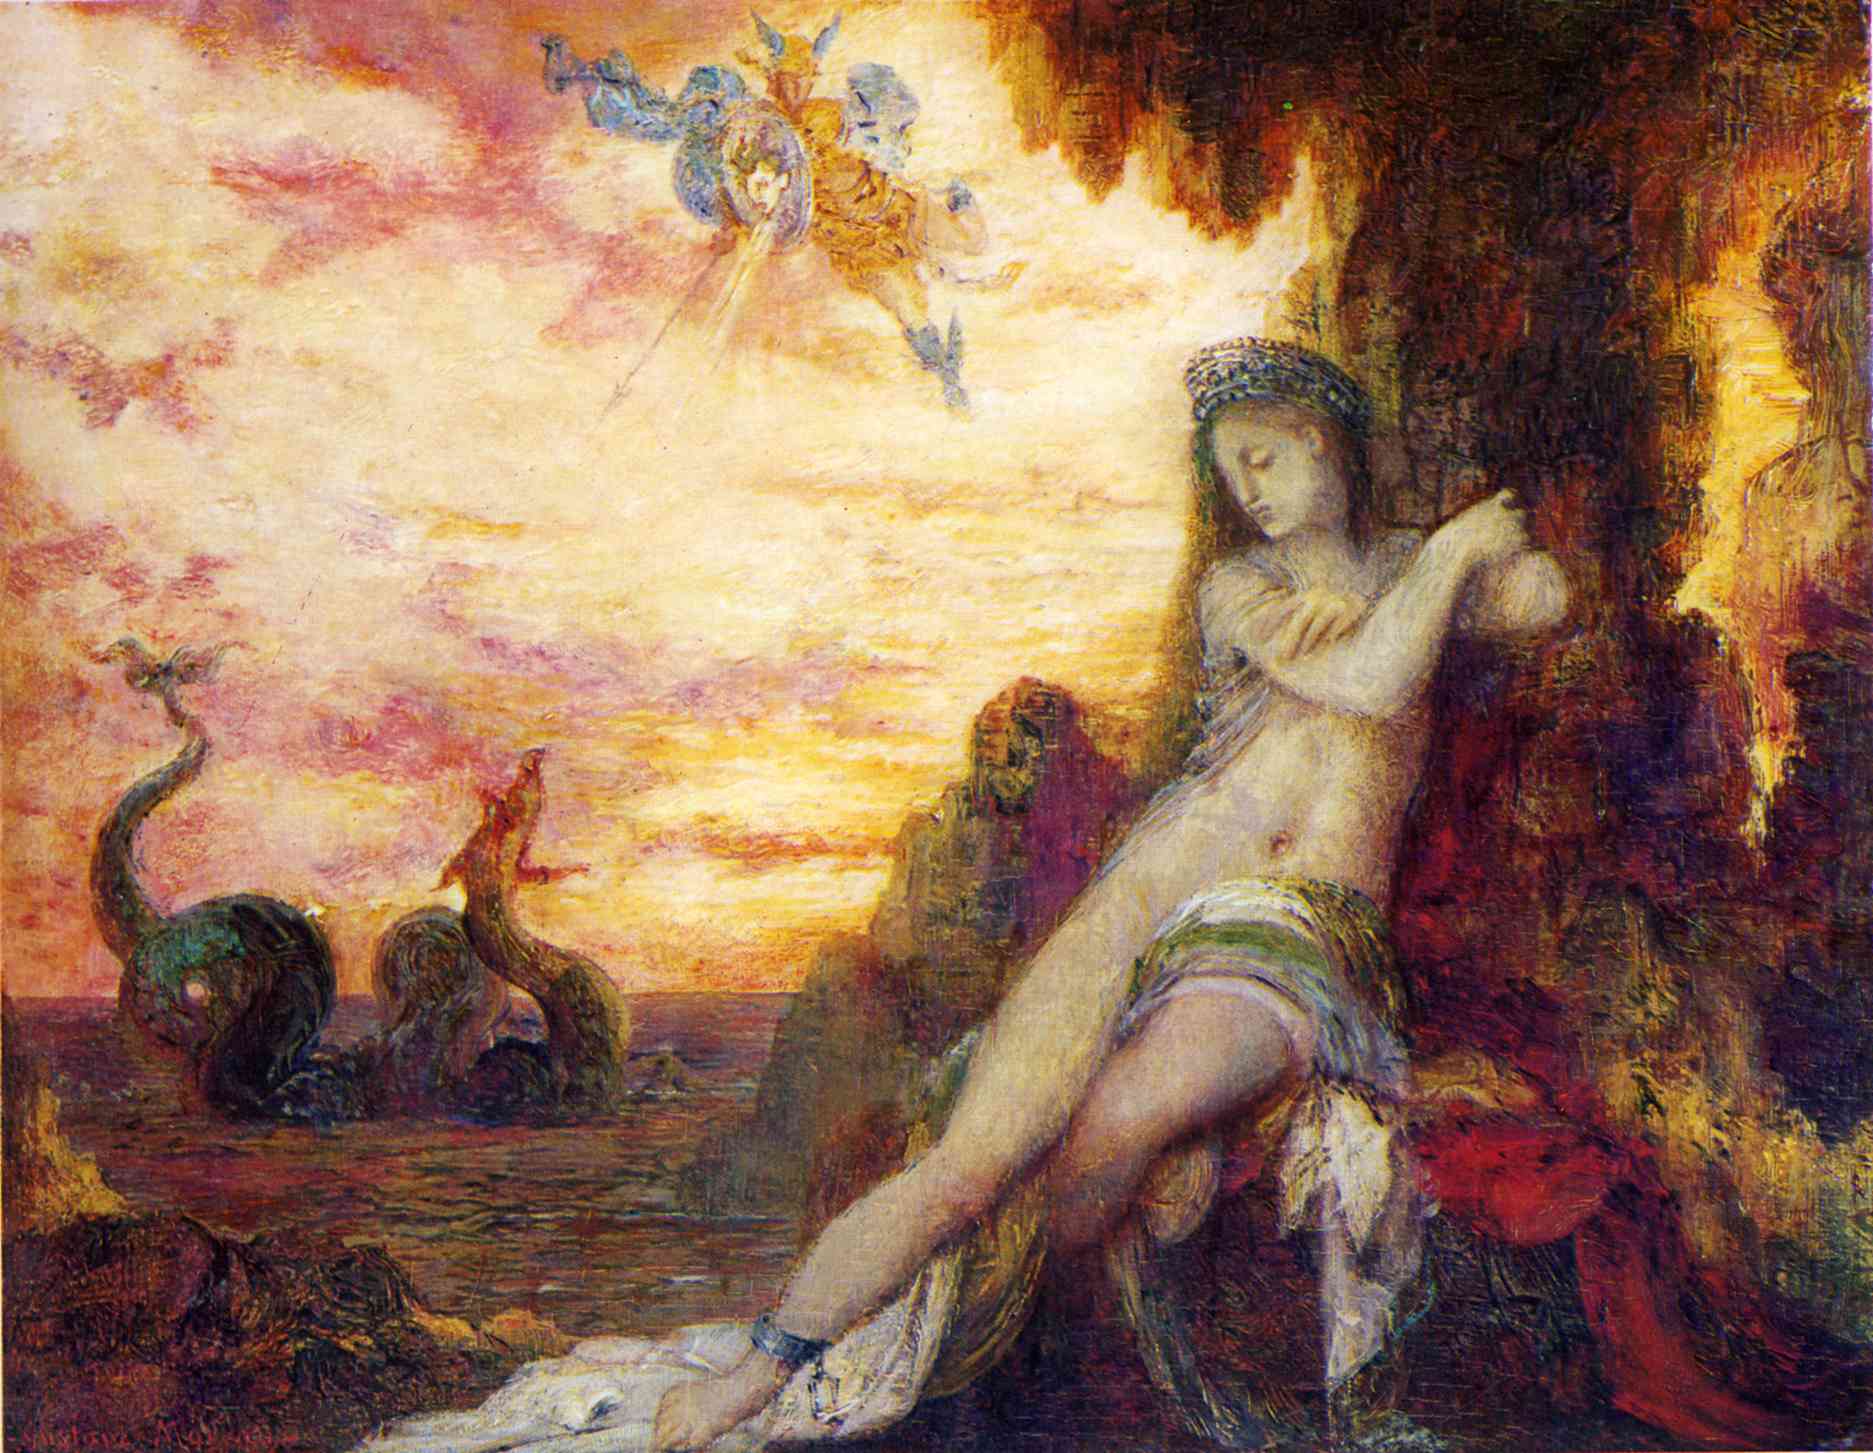 Perseus and Andromeda by Gustave Moreau - c. 1870 - 122 x 94 cm Bristol City Museums and Art Gallery